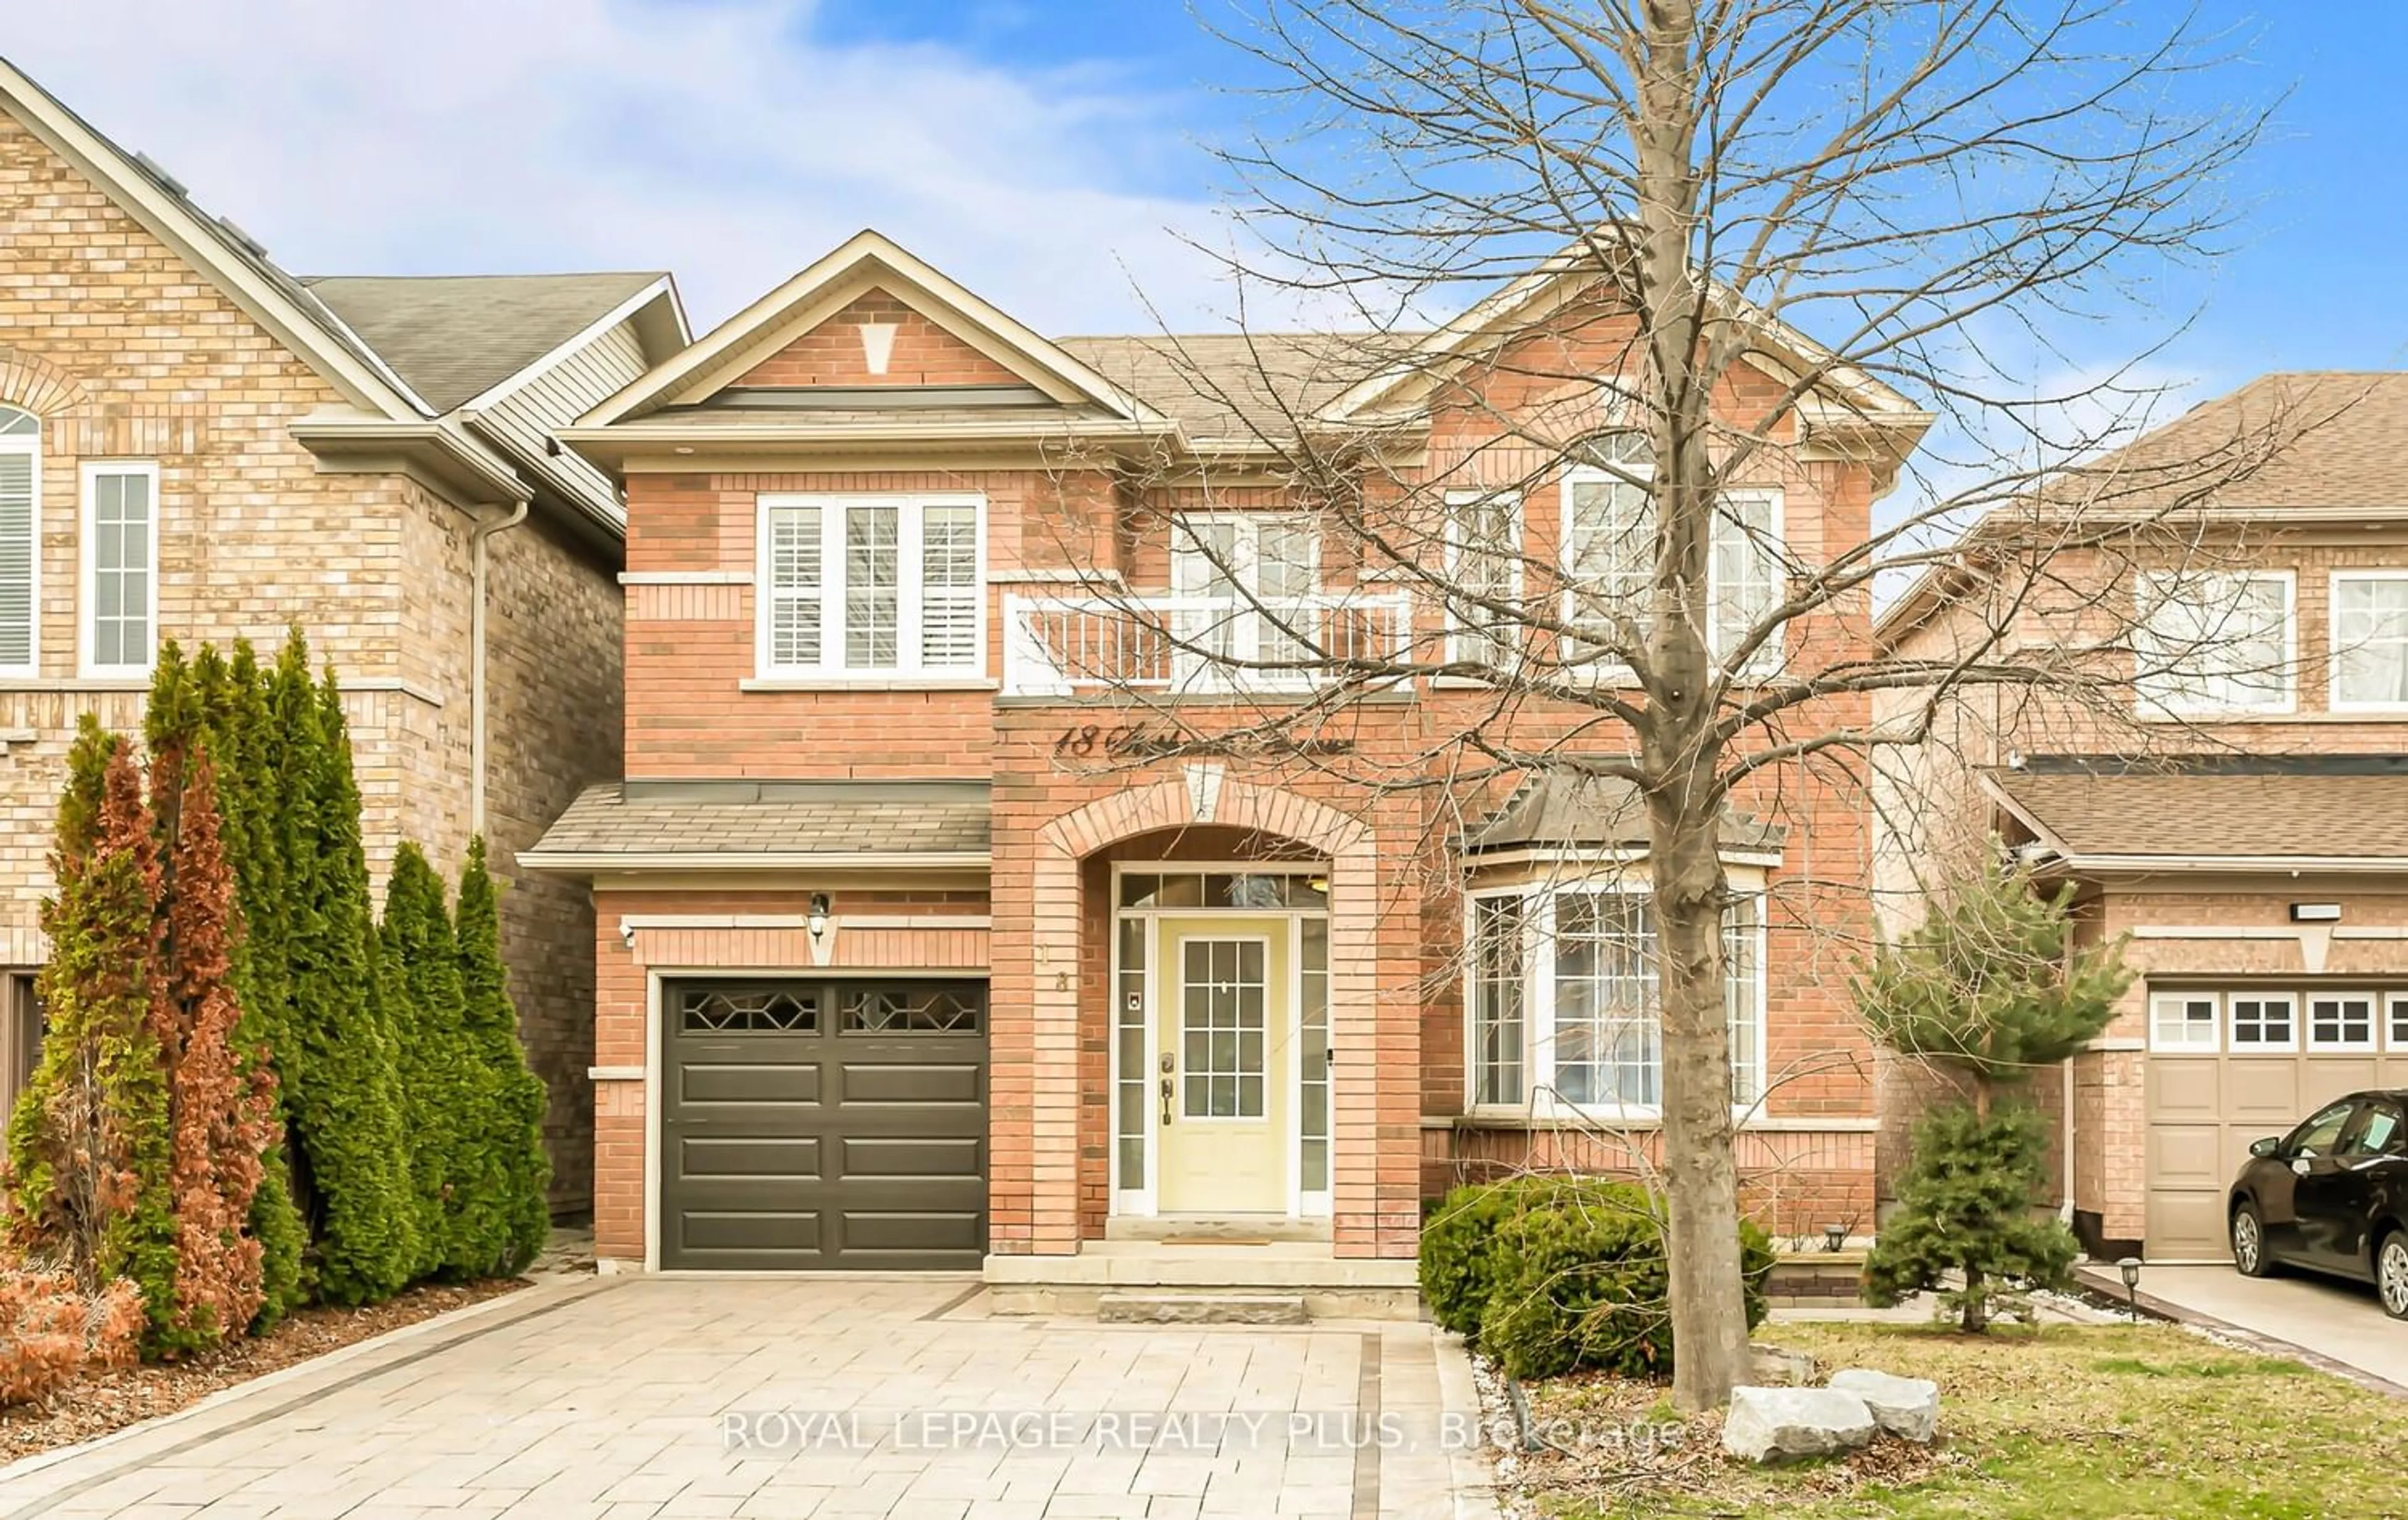 Home with brick exterior material for 18 Stephanie Ave, Brampton Ontario L6Y 5N3